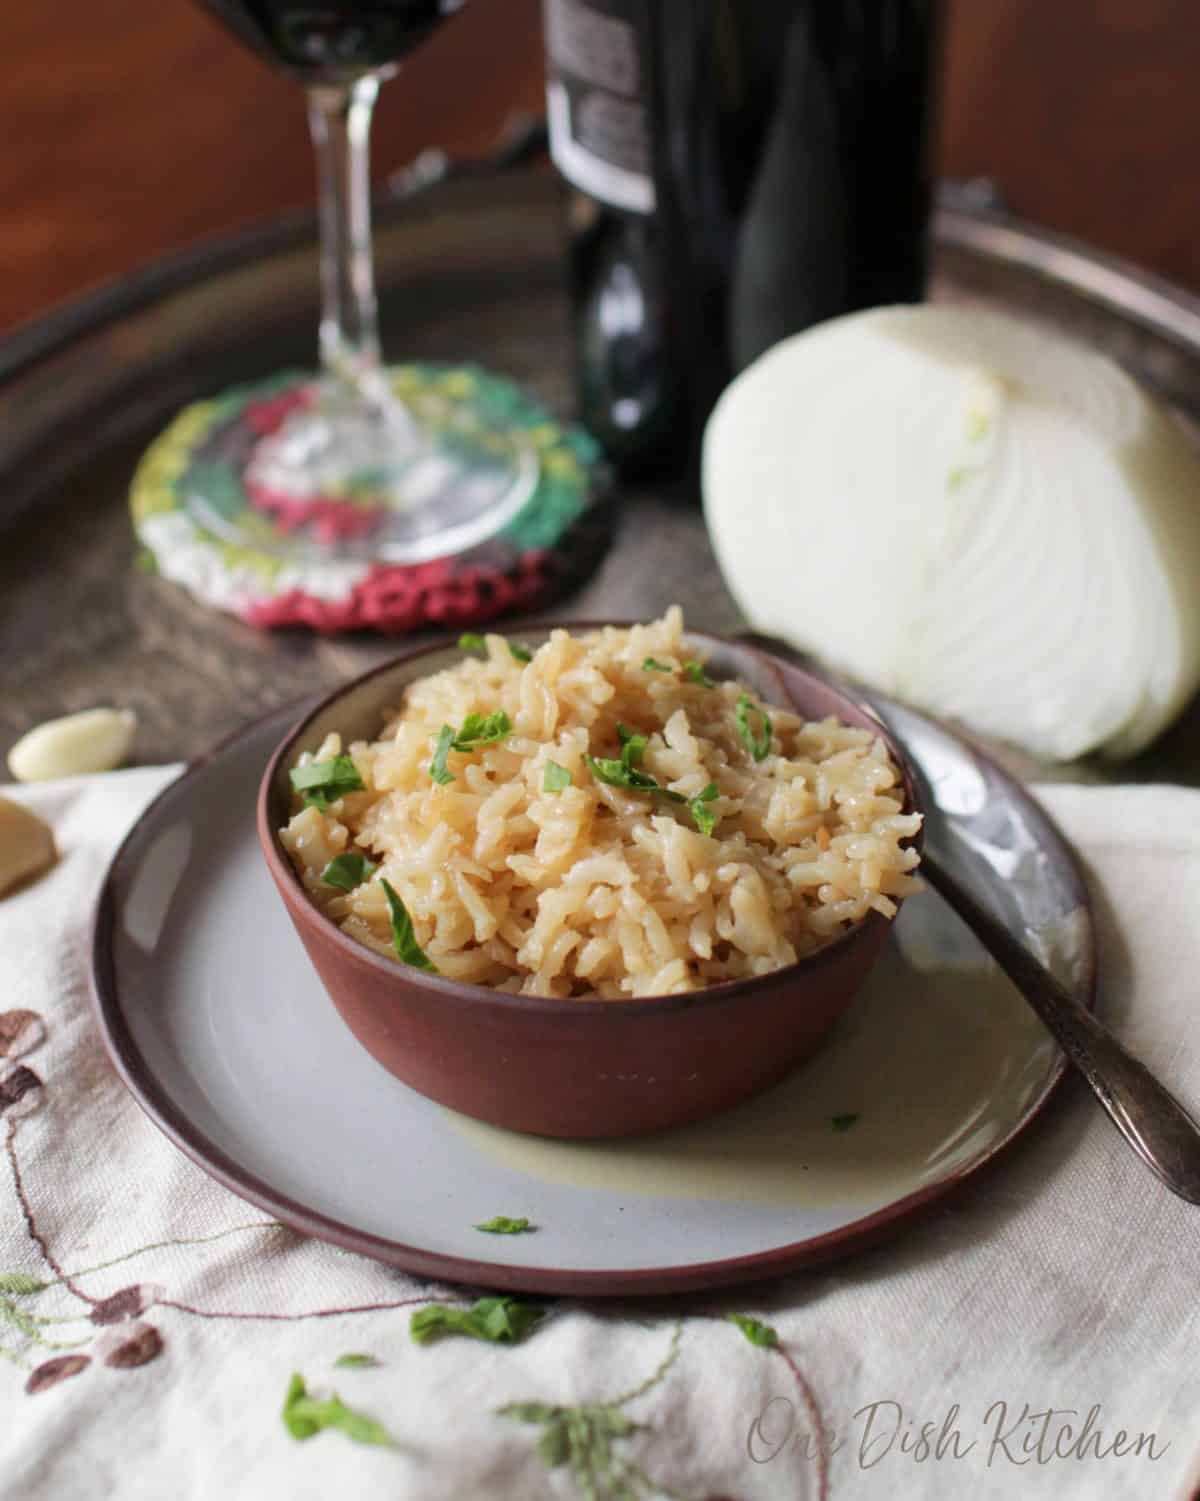 A bowl of rice pilaf plated on a metal tray next to half an onion, garlic cloves, and a glass of red wine 